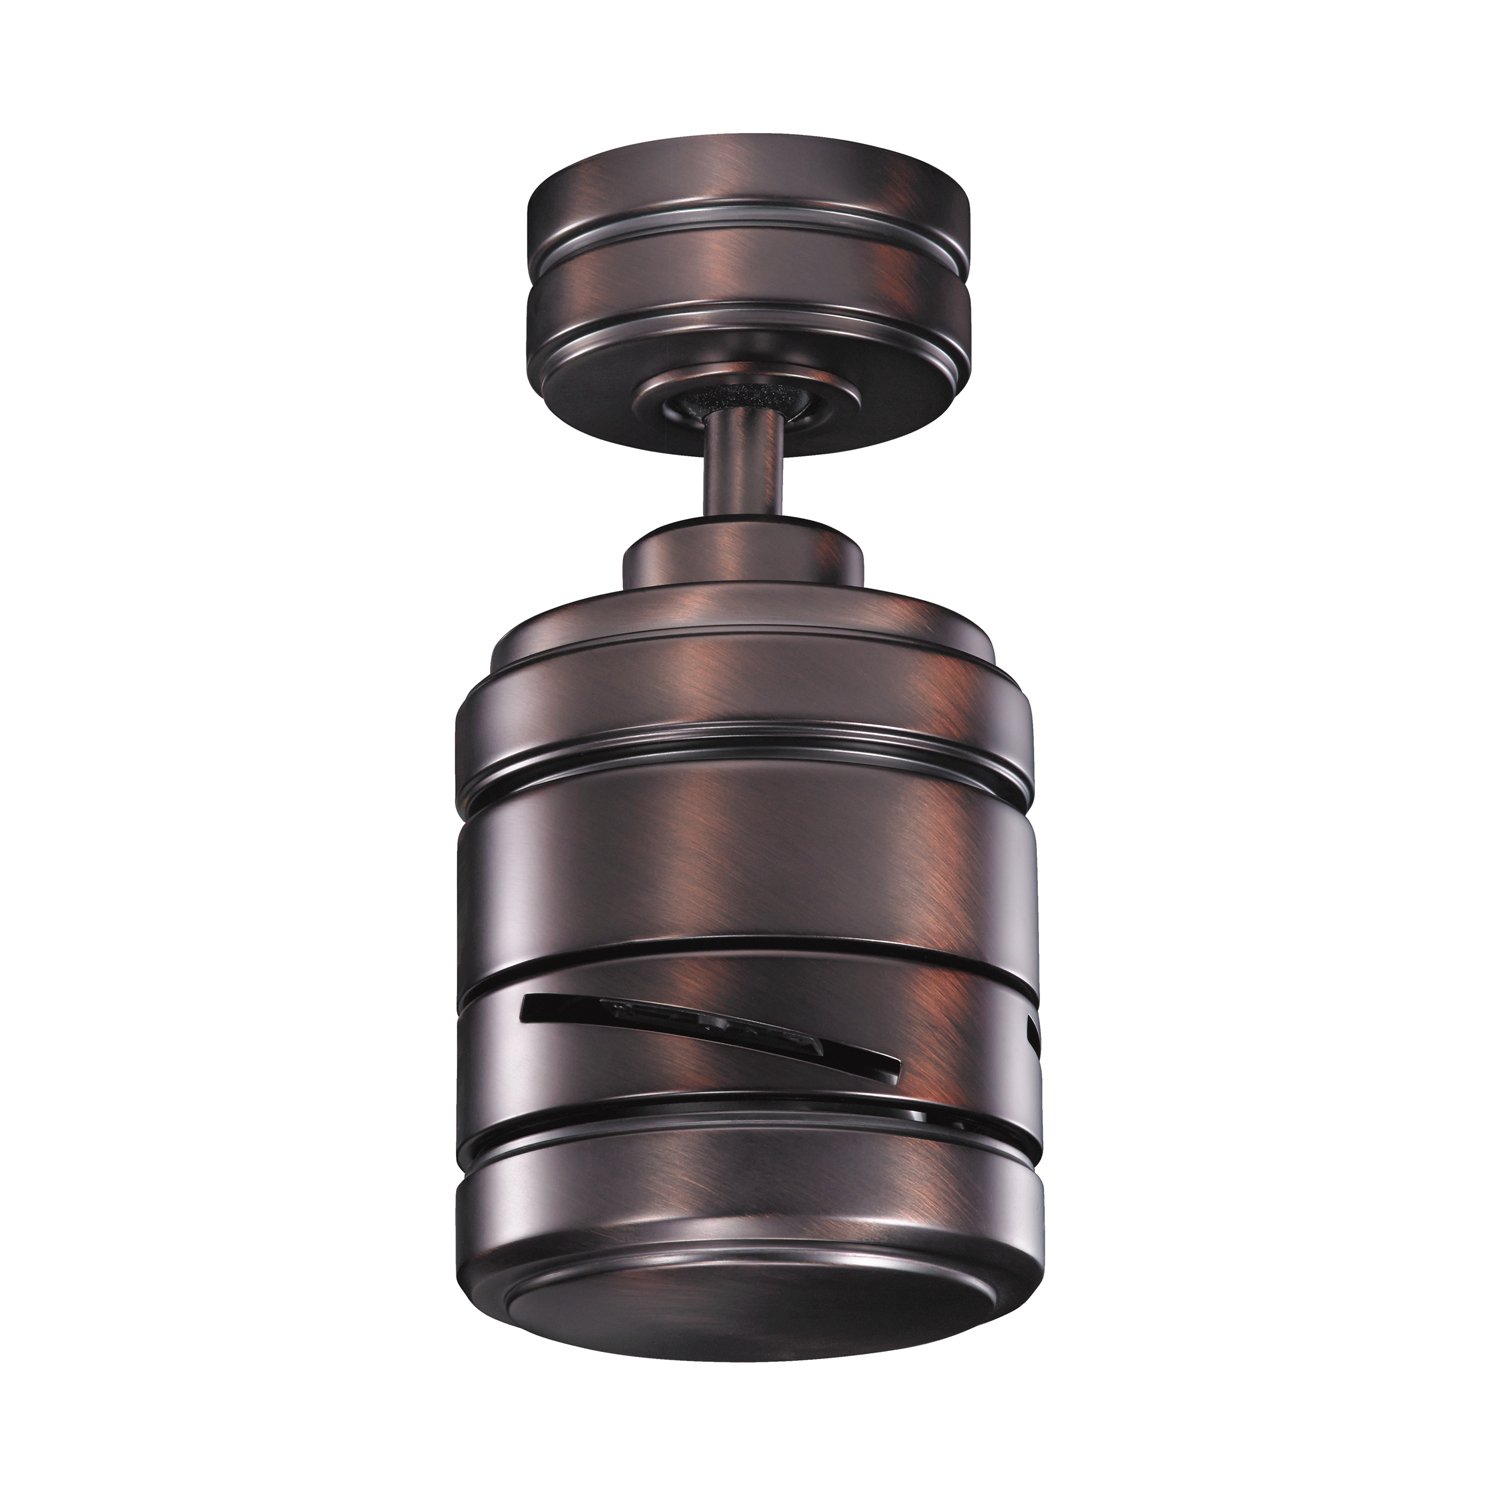 This unique Arkwrightâ„¢ fan is sure to leave a lasting impression in your home. Constructed from steel, this design features an Oil Brushed Bronze finish that will create a strong accent for any space. Motor assembly (300146), light kits (380047, 338203) and blades (370025, 370026, 370027, 370028, 370029 & 370030) Sold Separately. This item is Energy Star-certified when paired with blades 370027 or 370030.